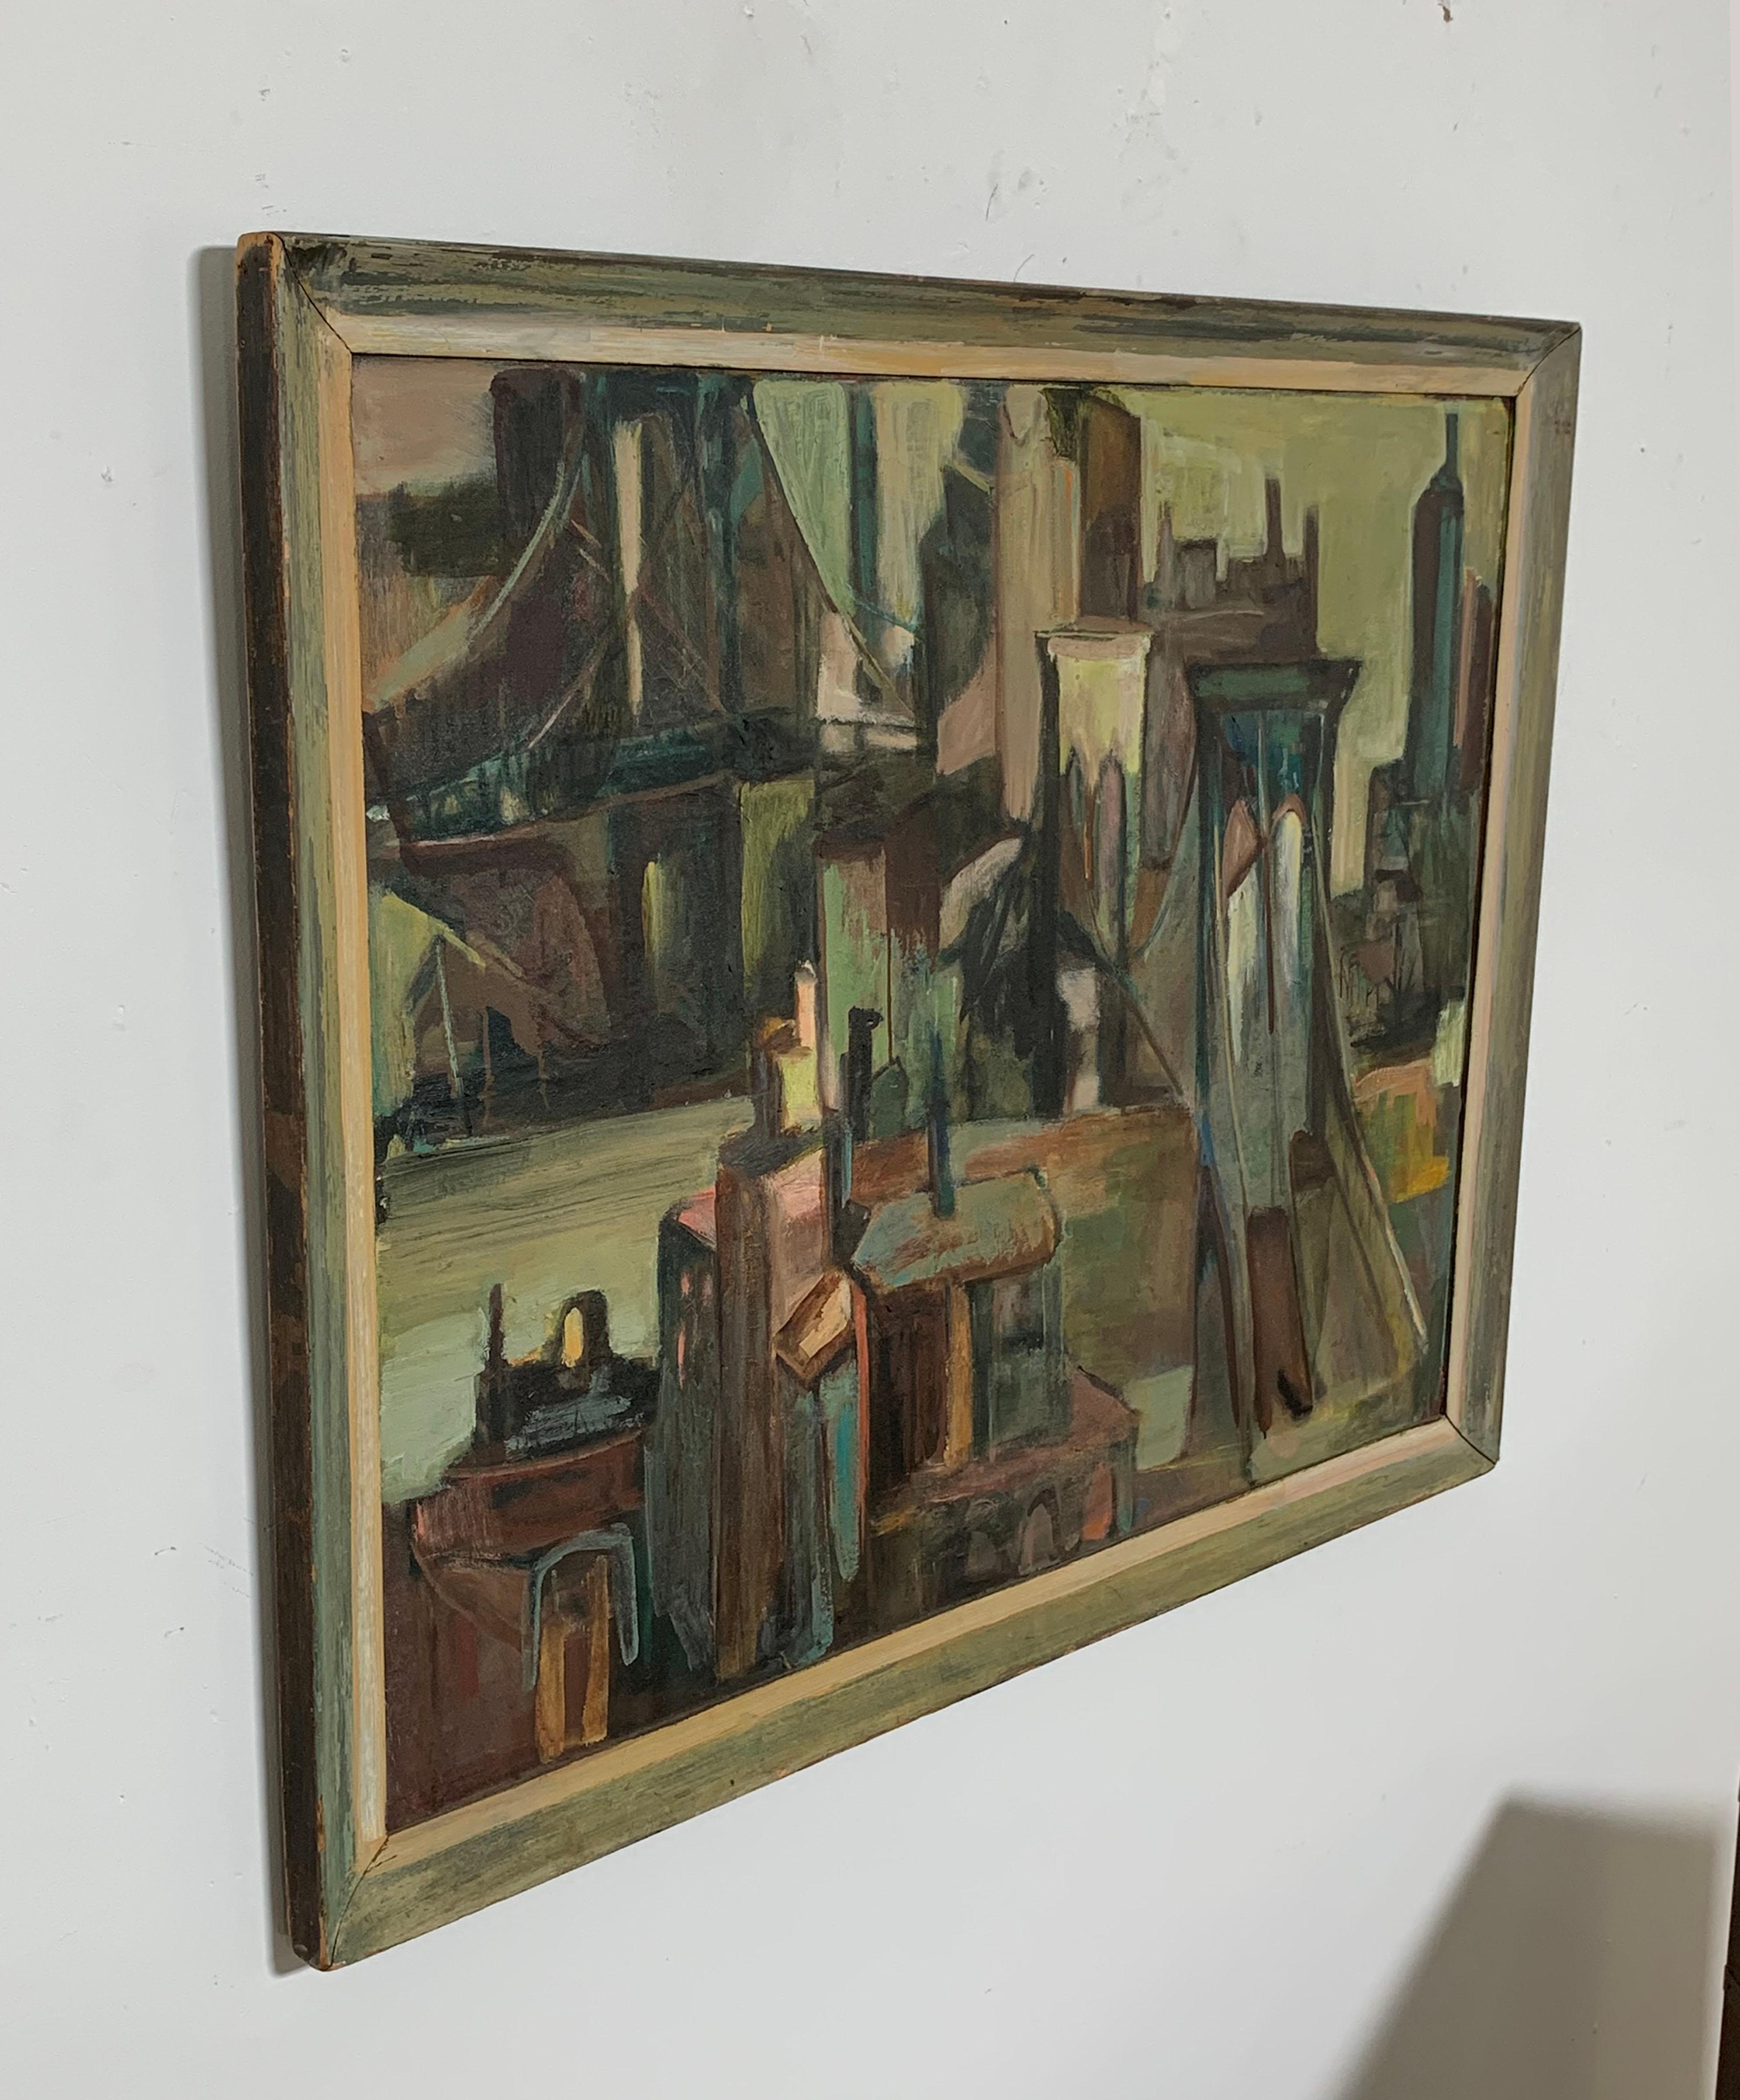 A modernist scene of New York City’s east side bridges and Brooklyn (Queens?) rooftops painted in a manner and palette reminiscent of the region’s earlier Ashcan School. Signed on reverse B. Simmons and dated 1957.